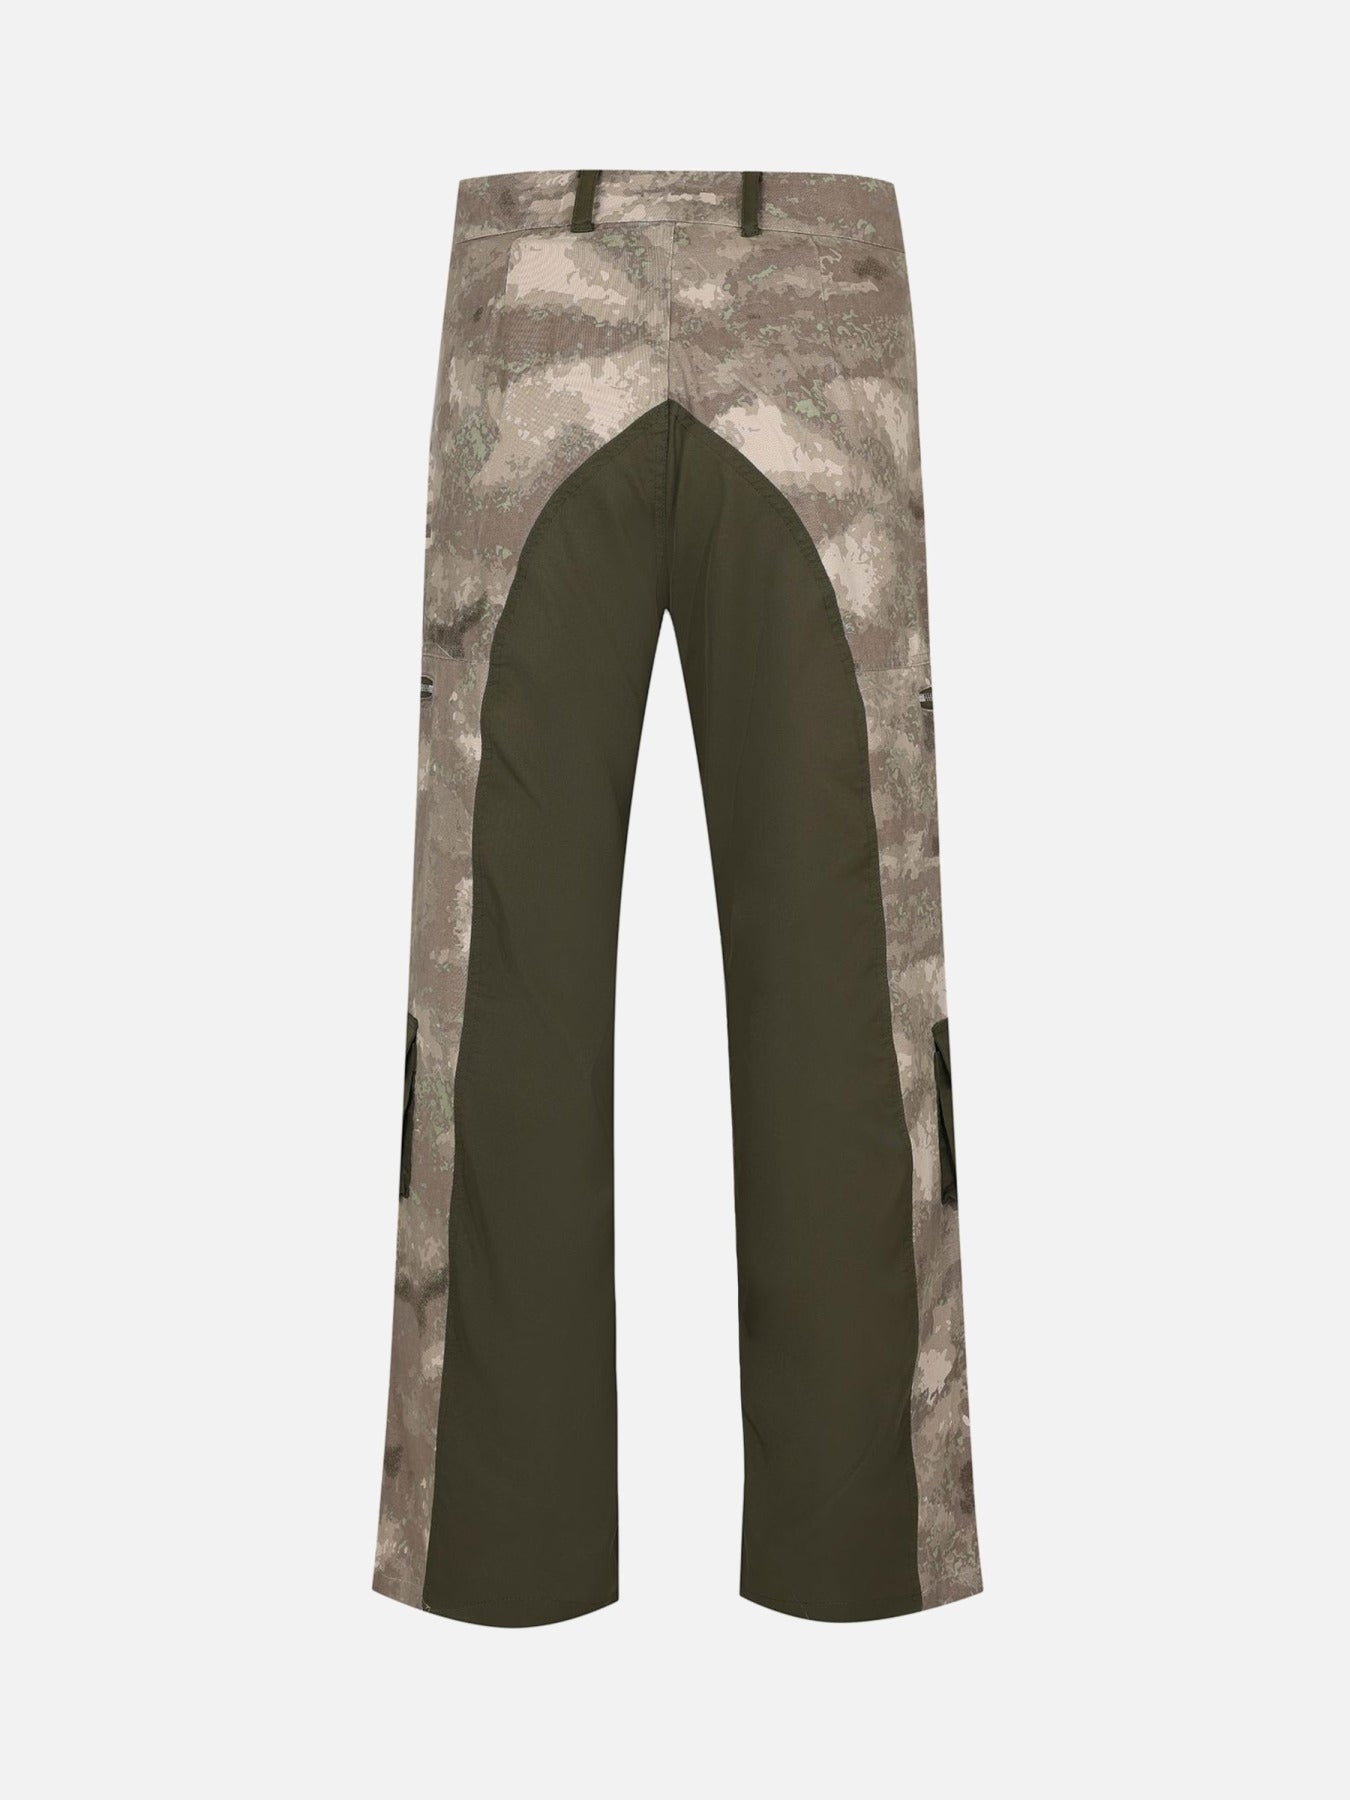 The Supermade American High Street Functional Style Casual Pants